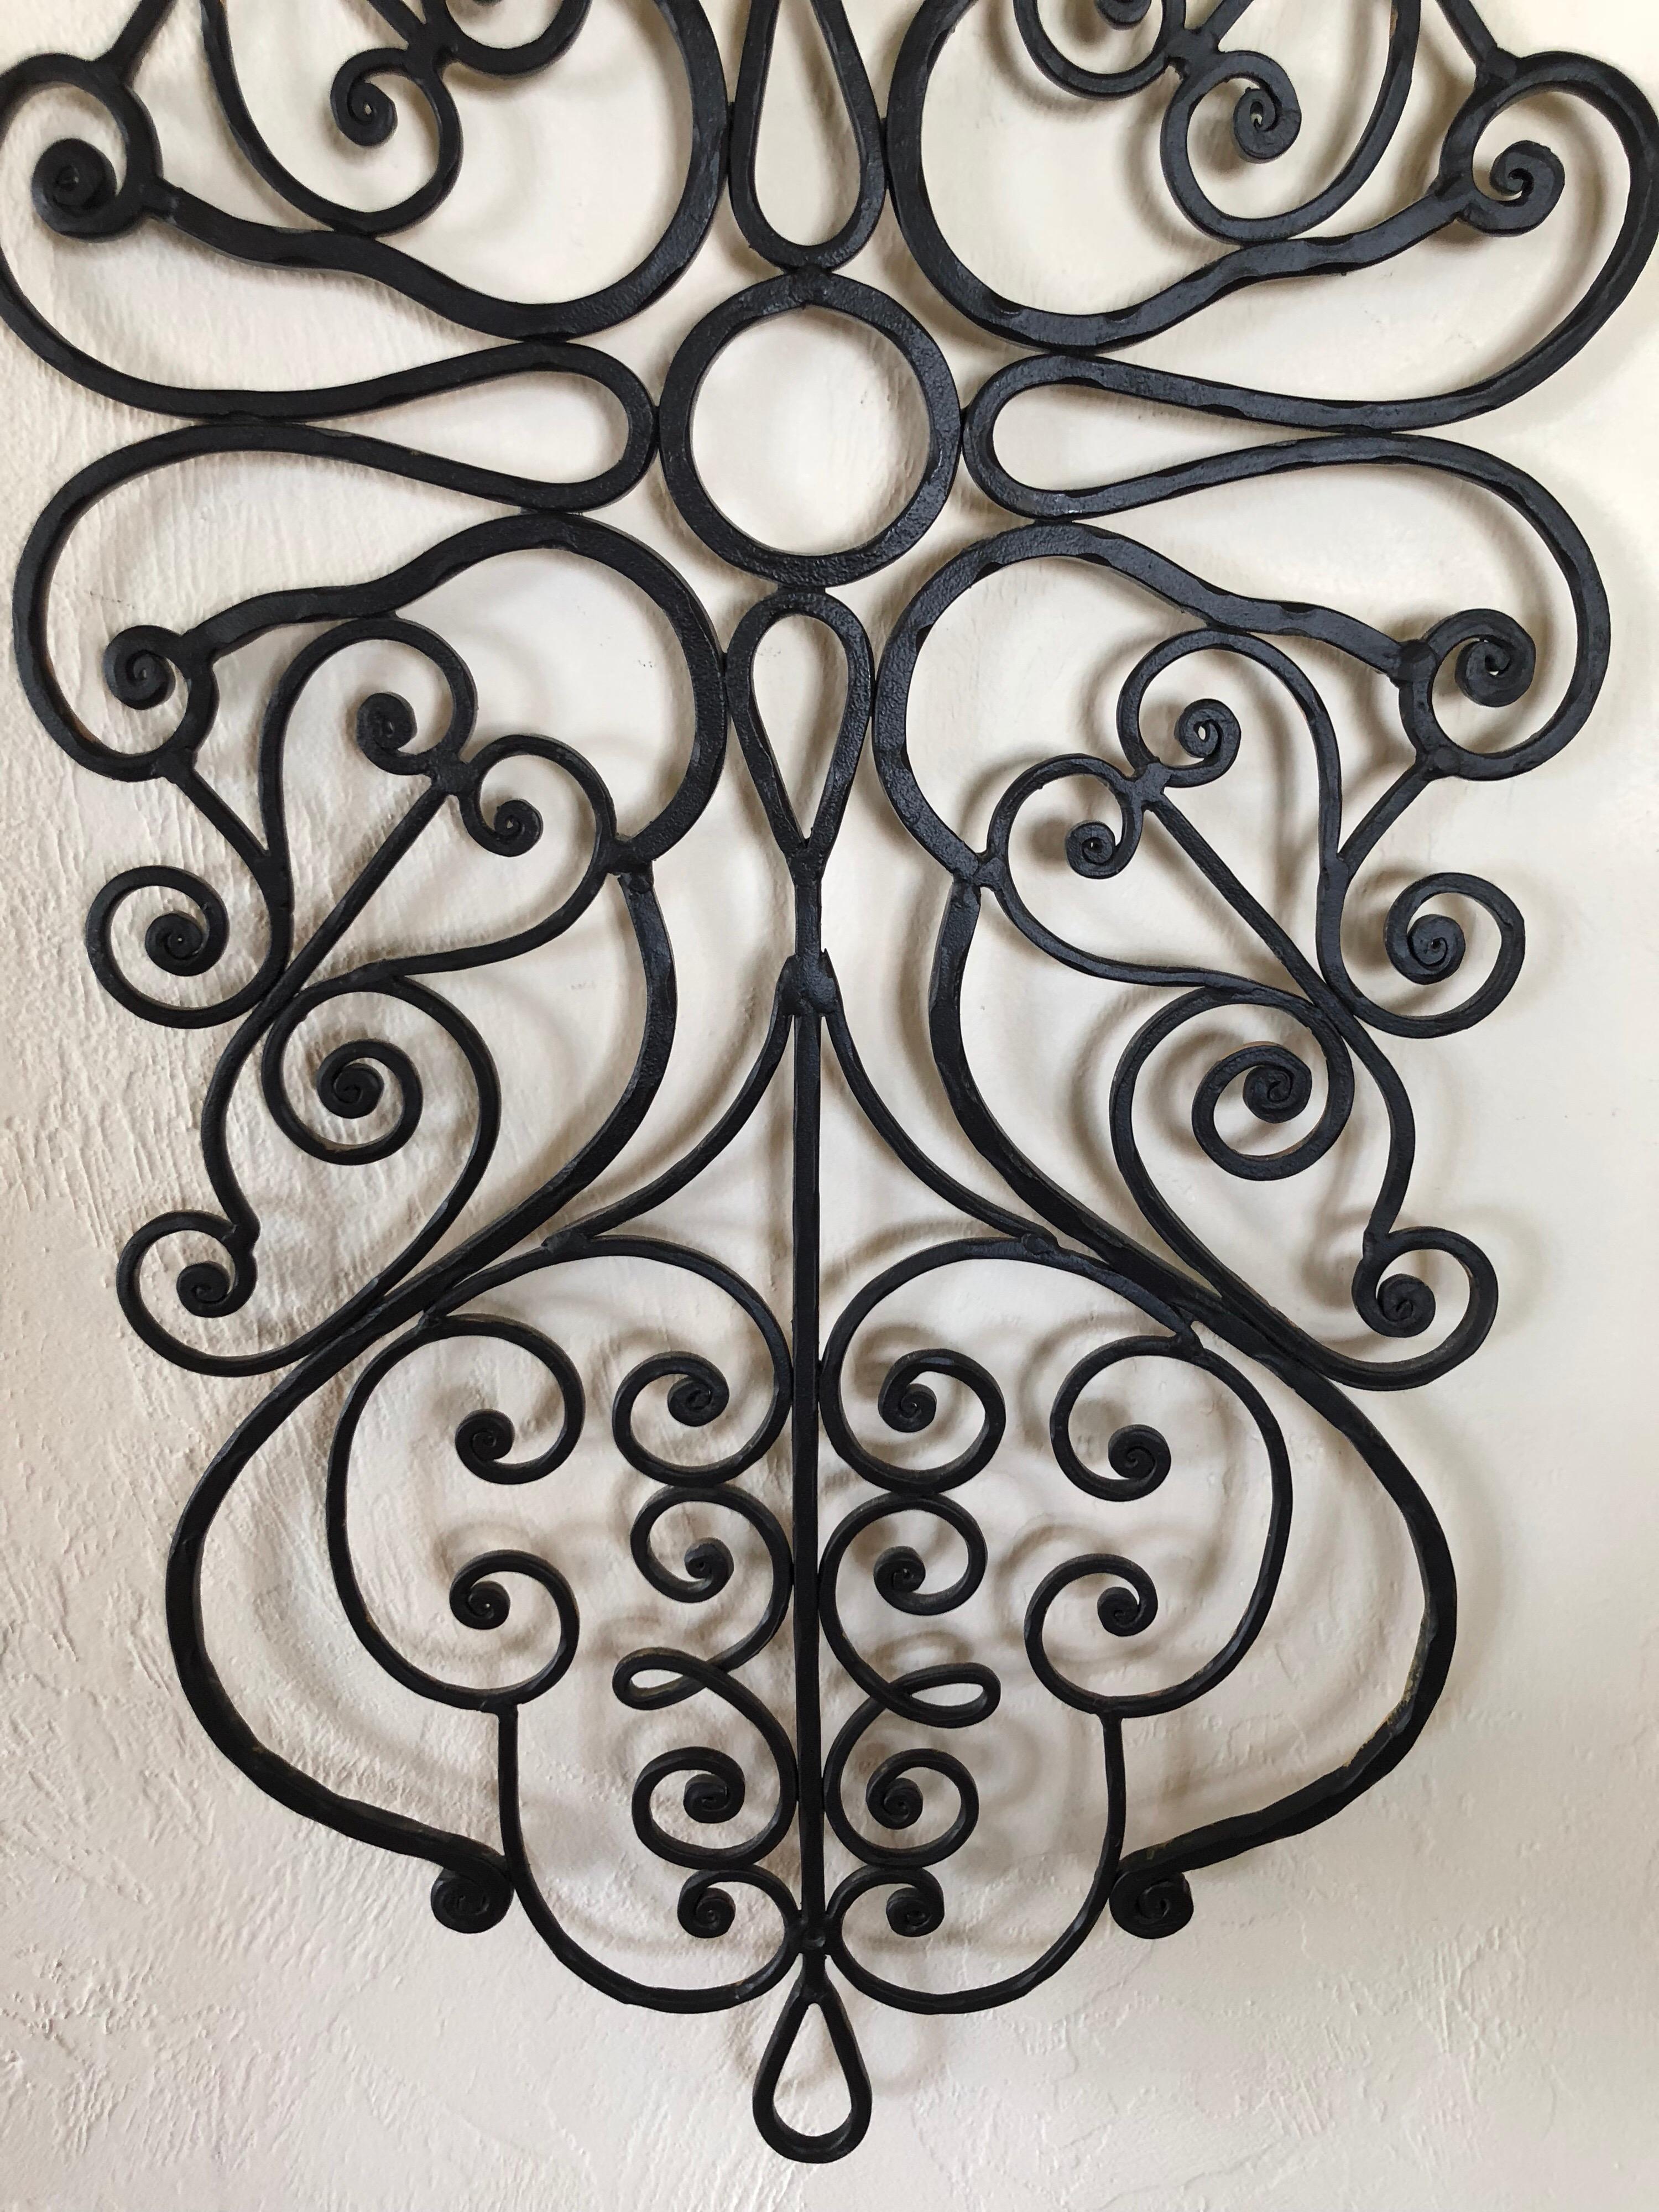 Large Hand-Wrought Iron Wall Sculpture 2